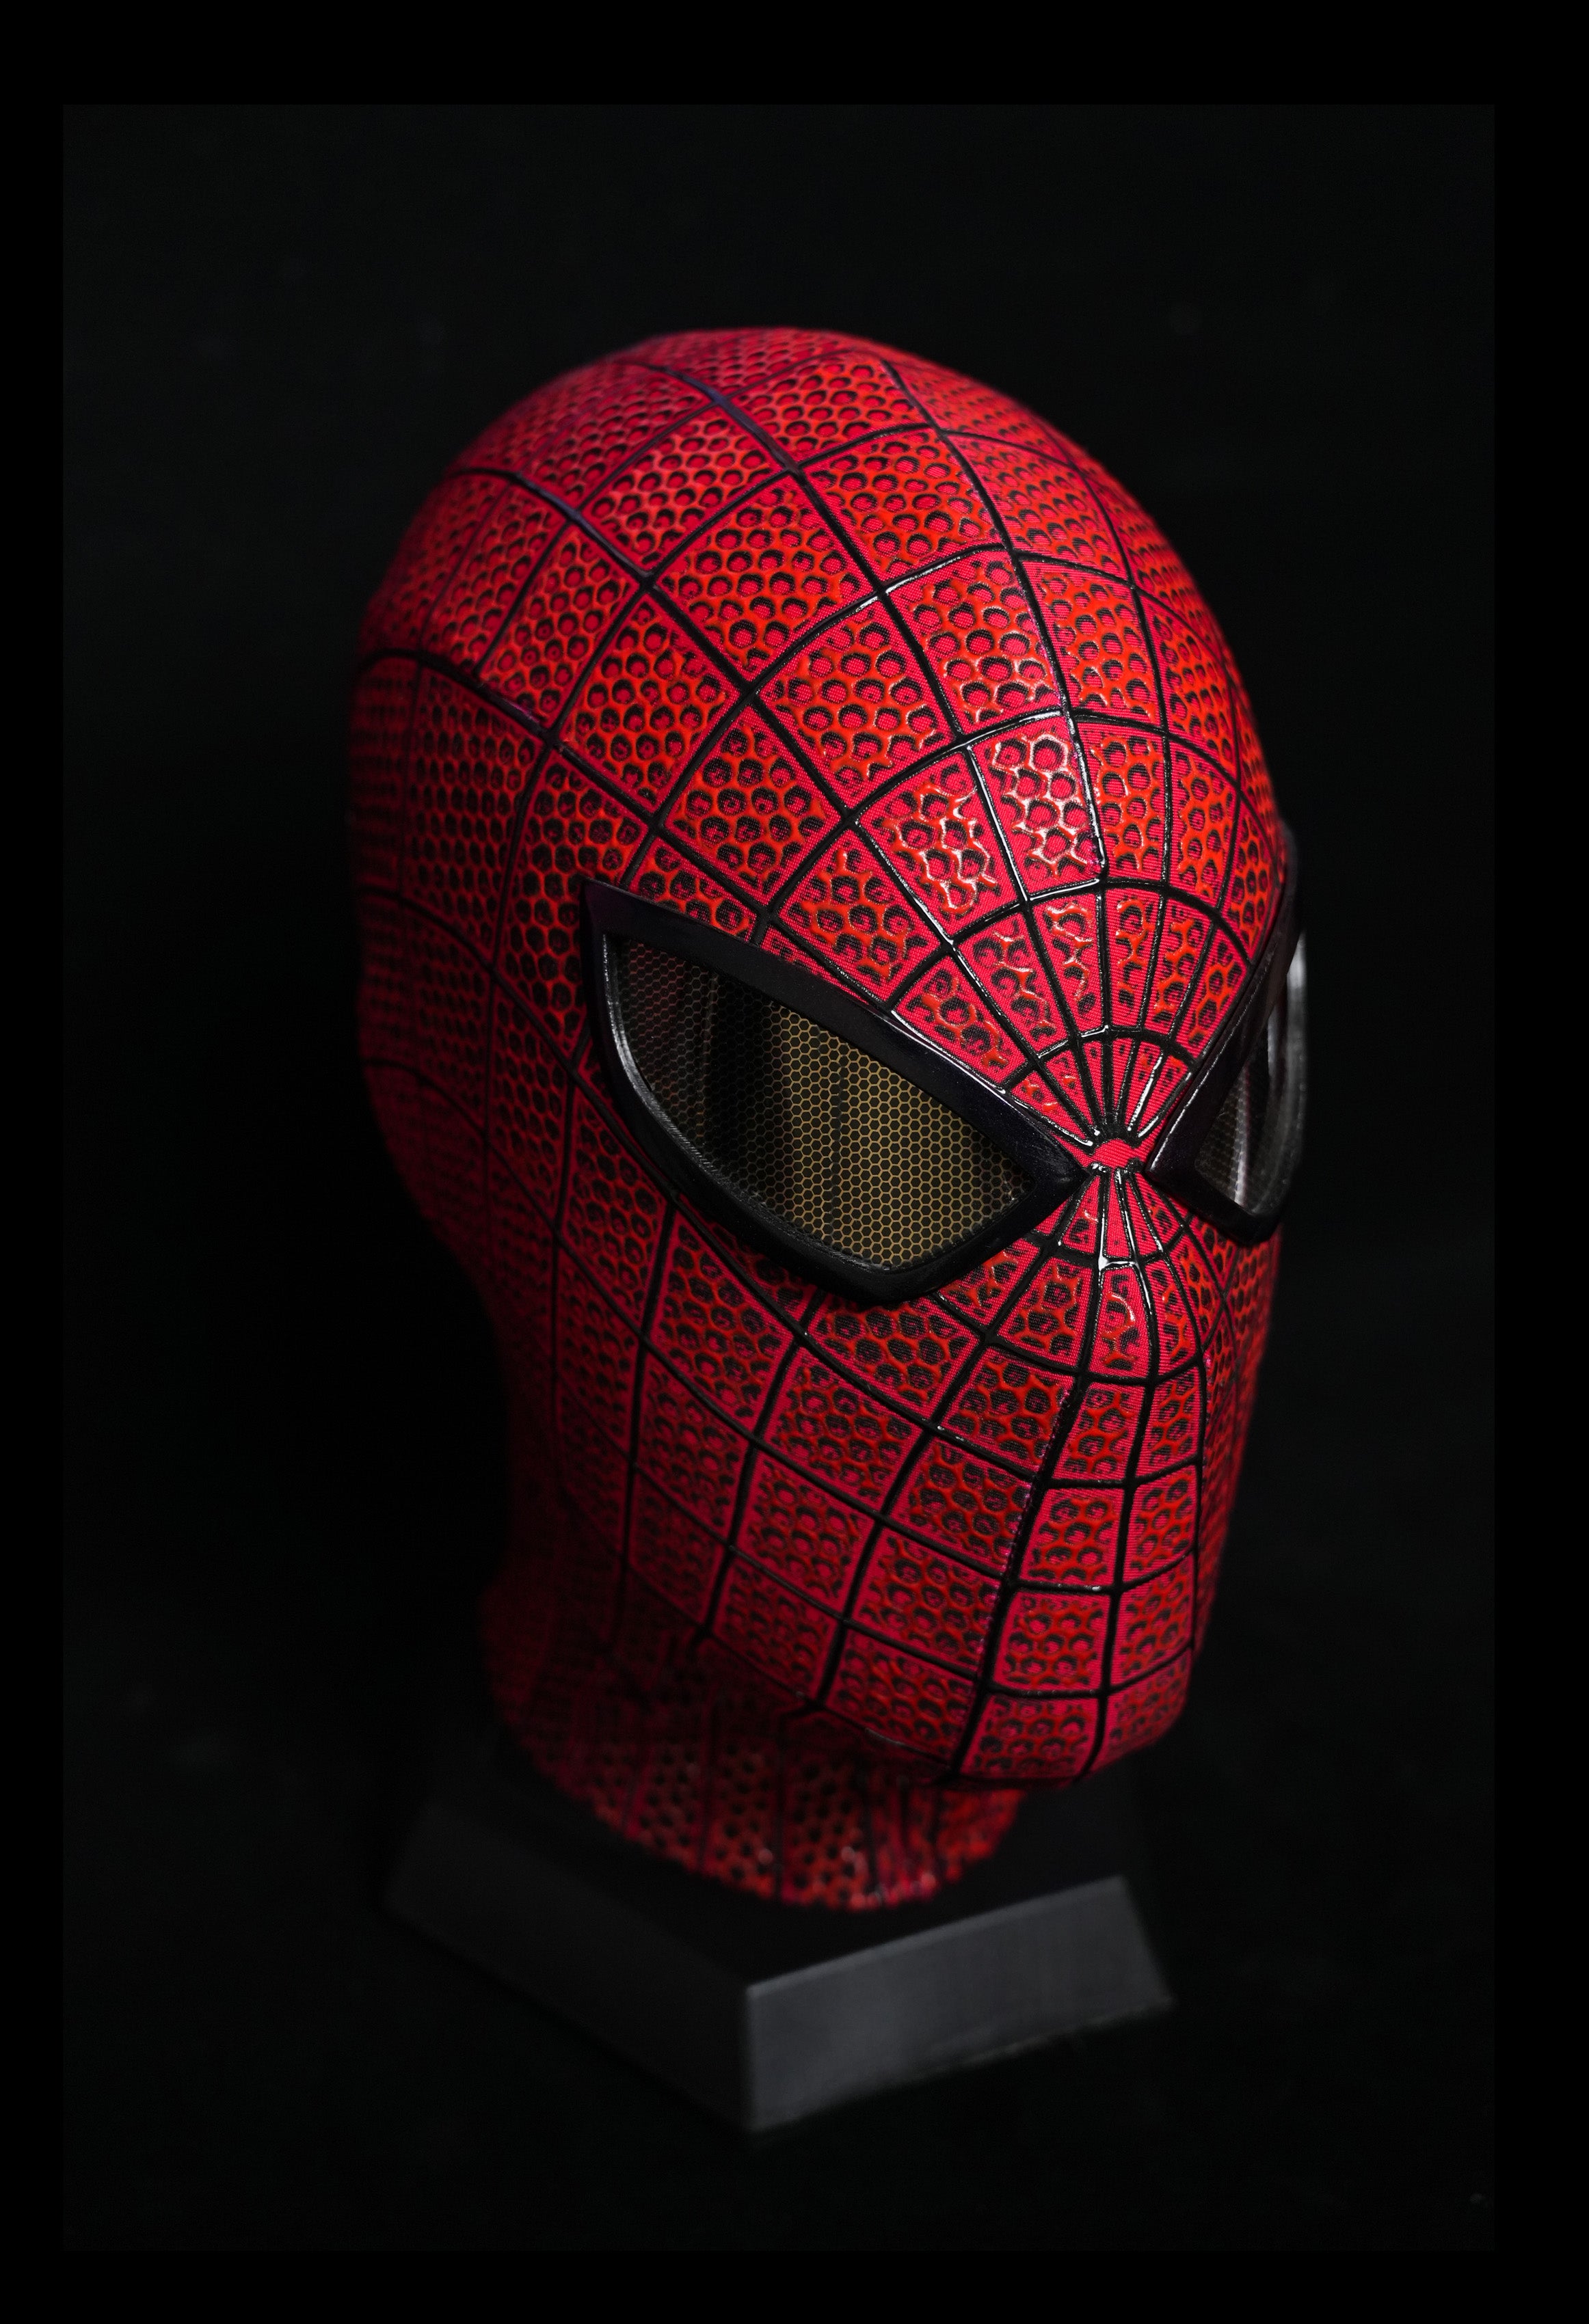 TASM 1 mask (Andrew) with Faceshell and Lenses Wearable Movie Prop Replica (Adult)